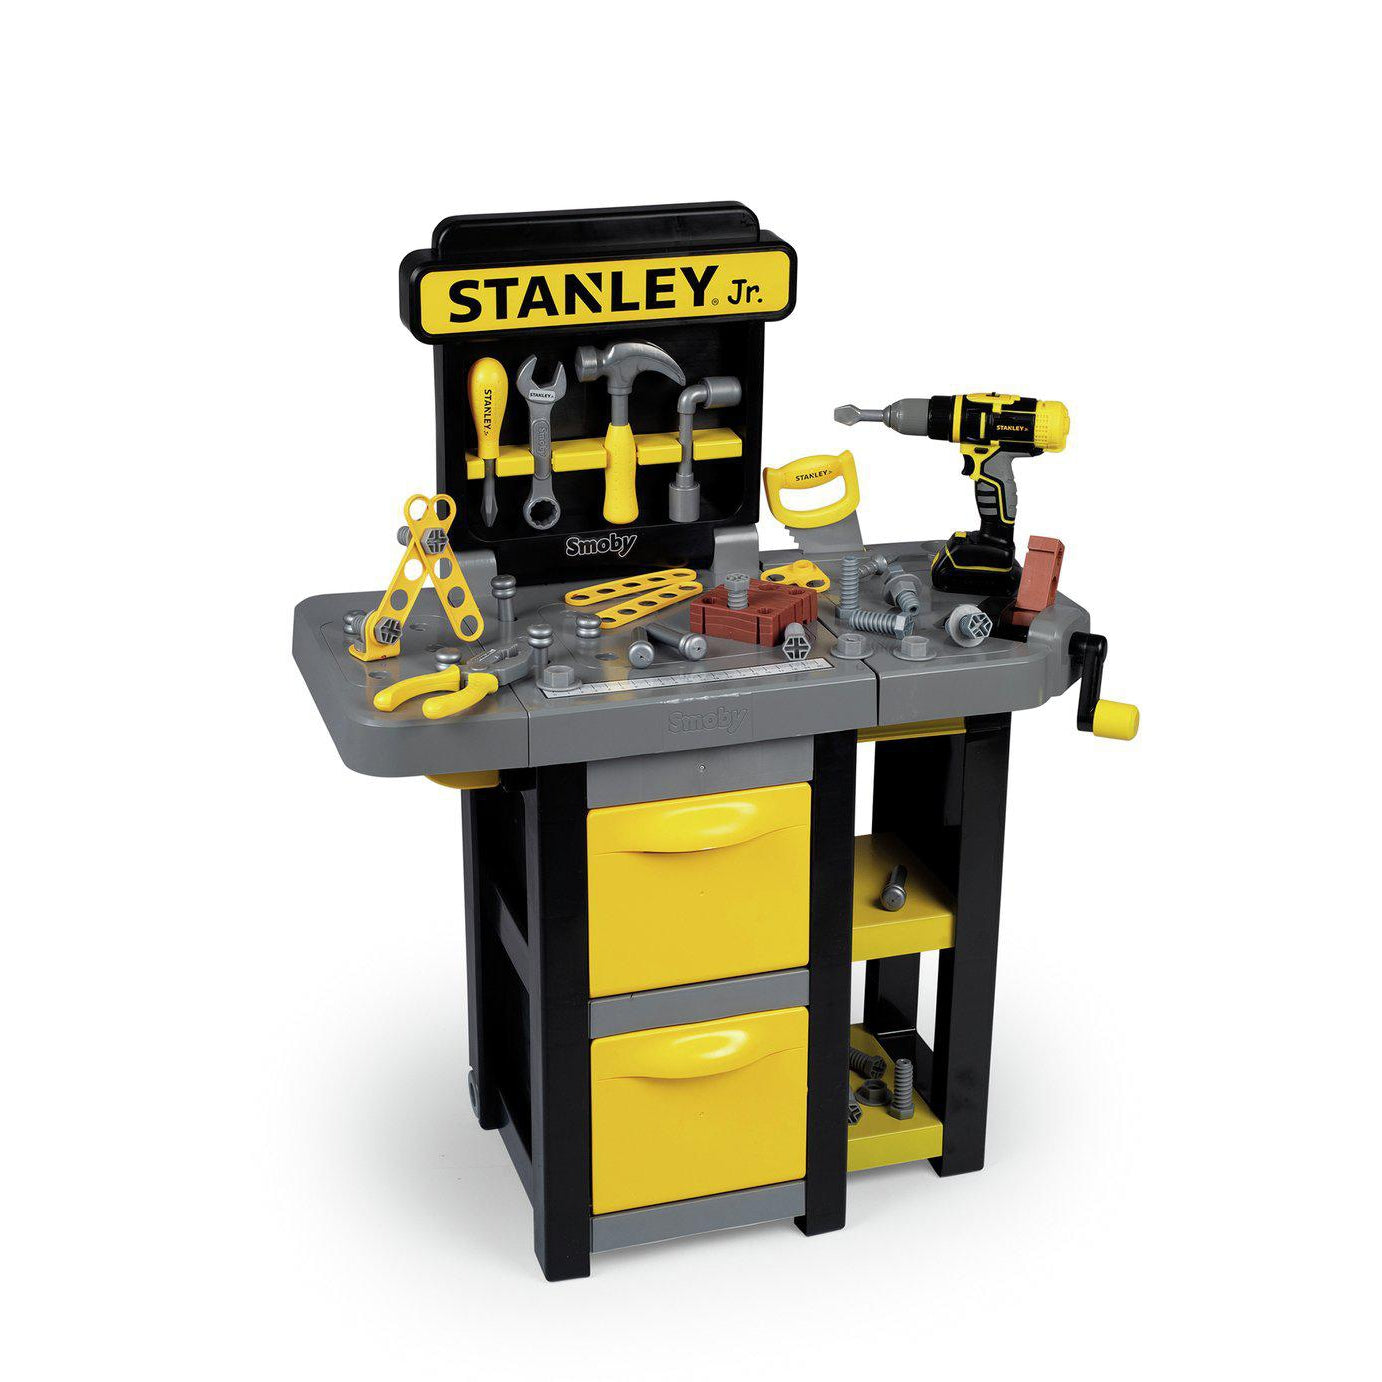 STANLEY WORK BENCH - THE TOY STORE